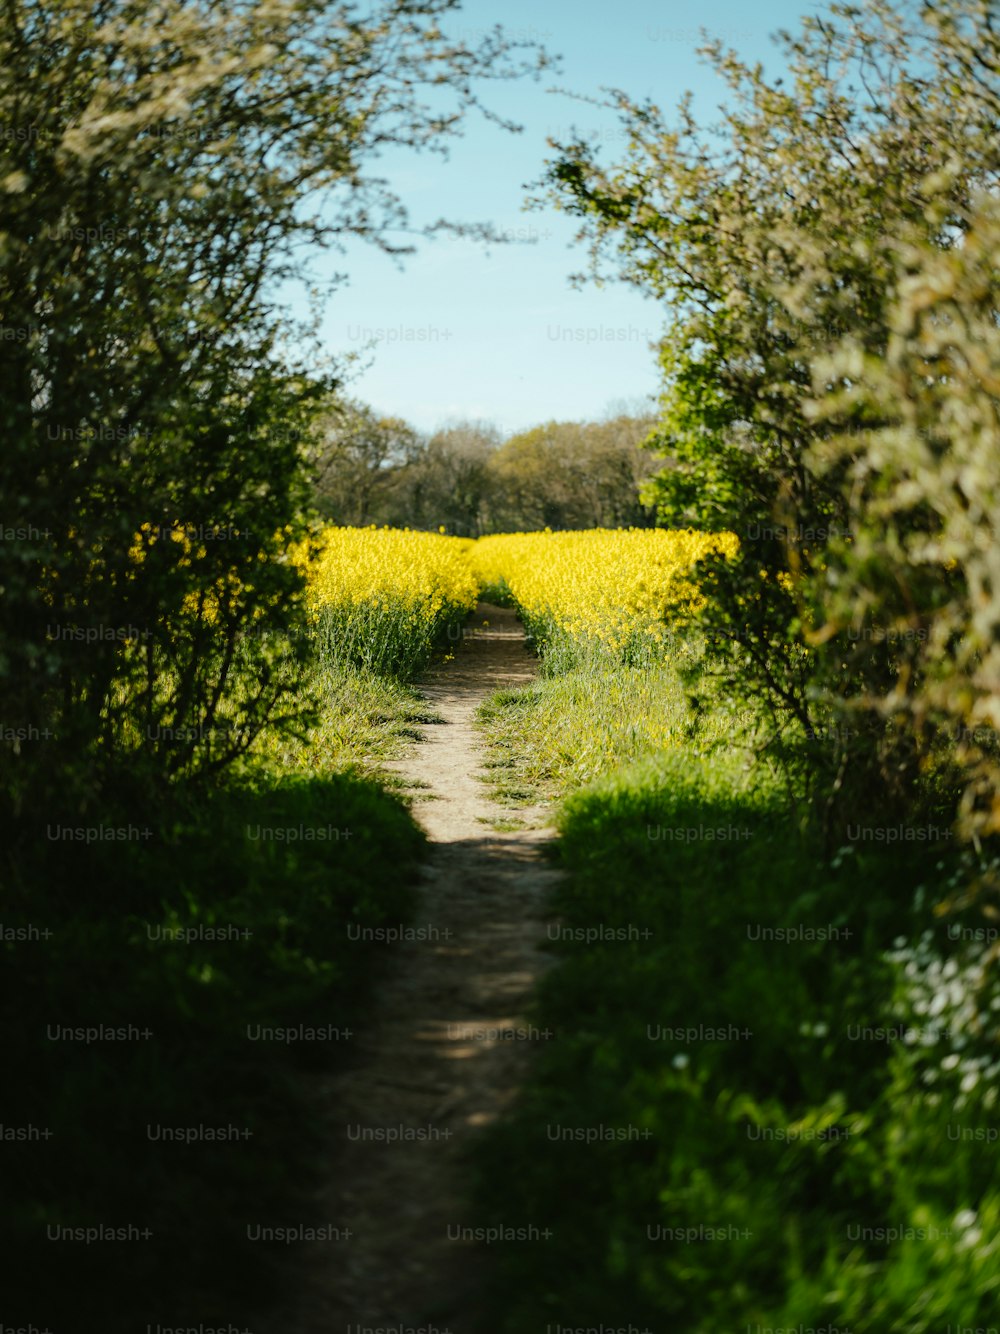 a dirt path through a field of yellow flowers